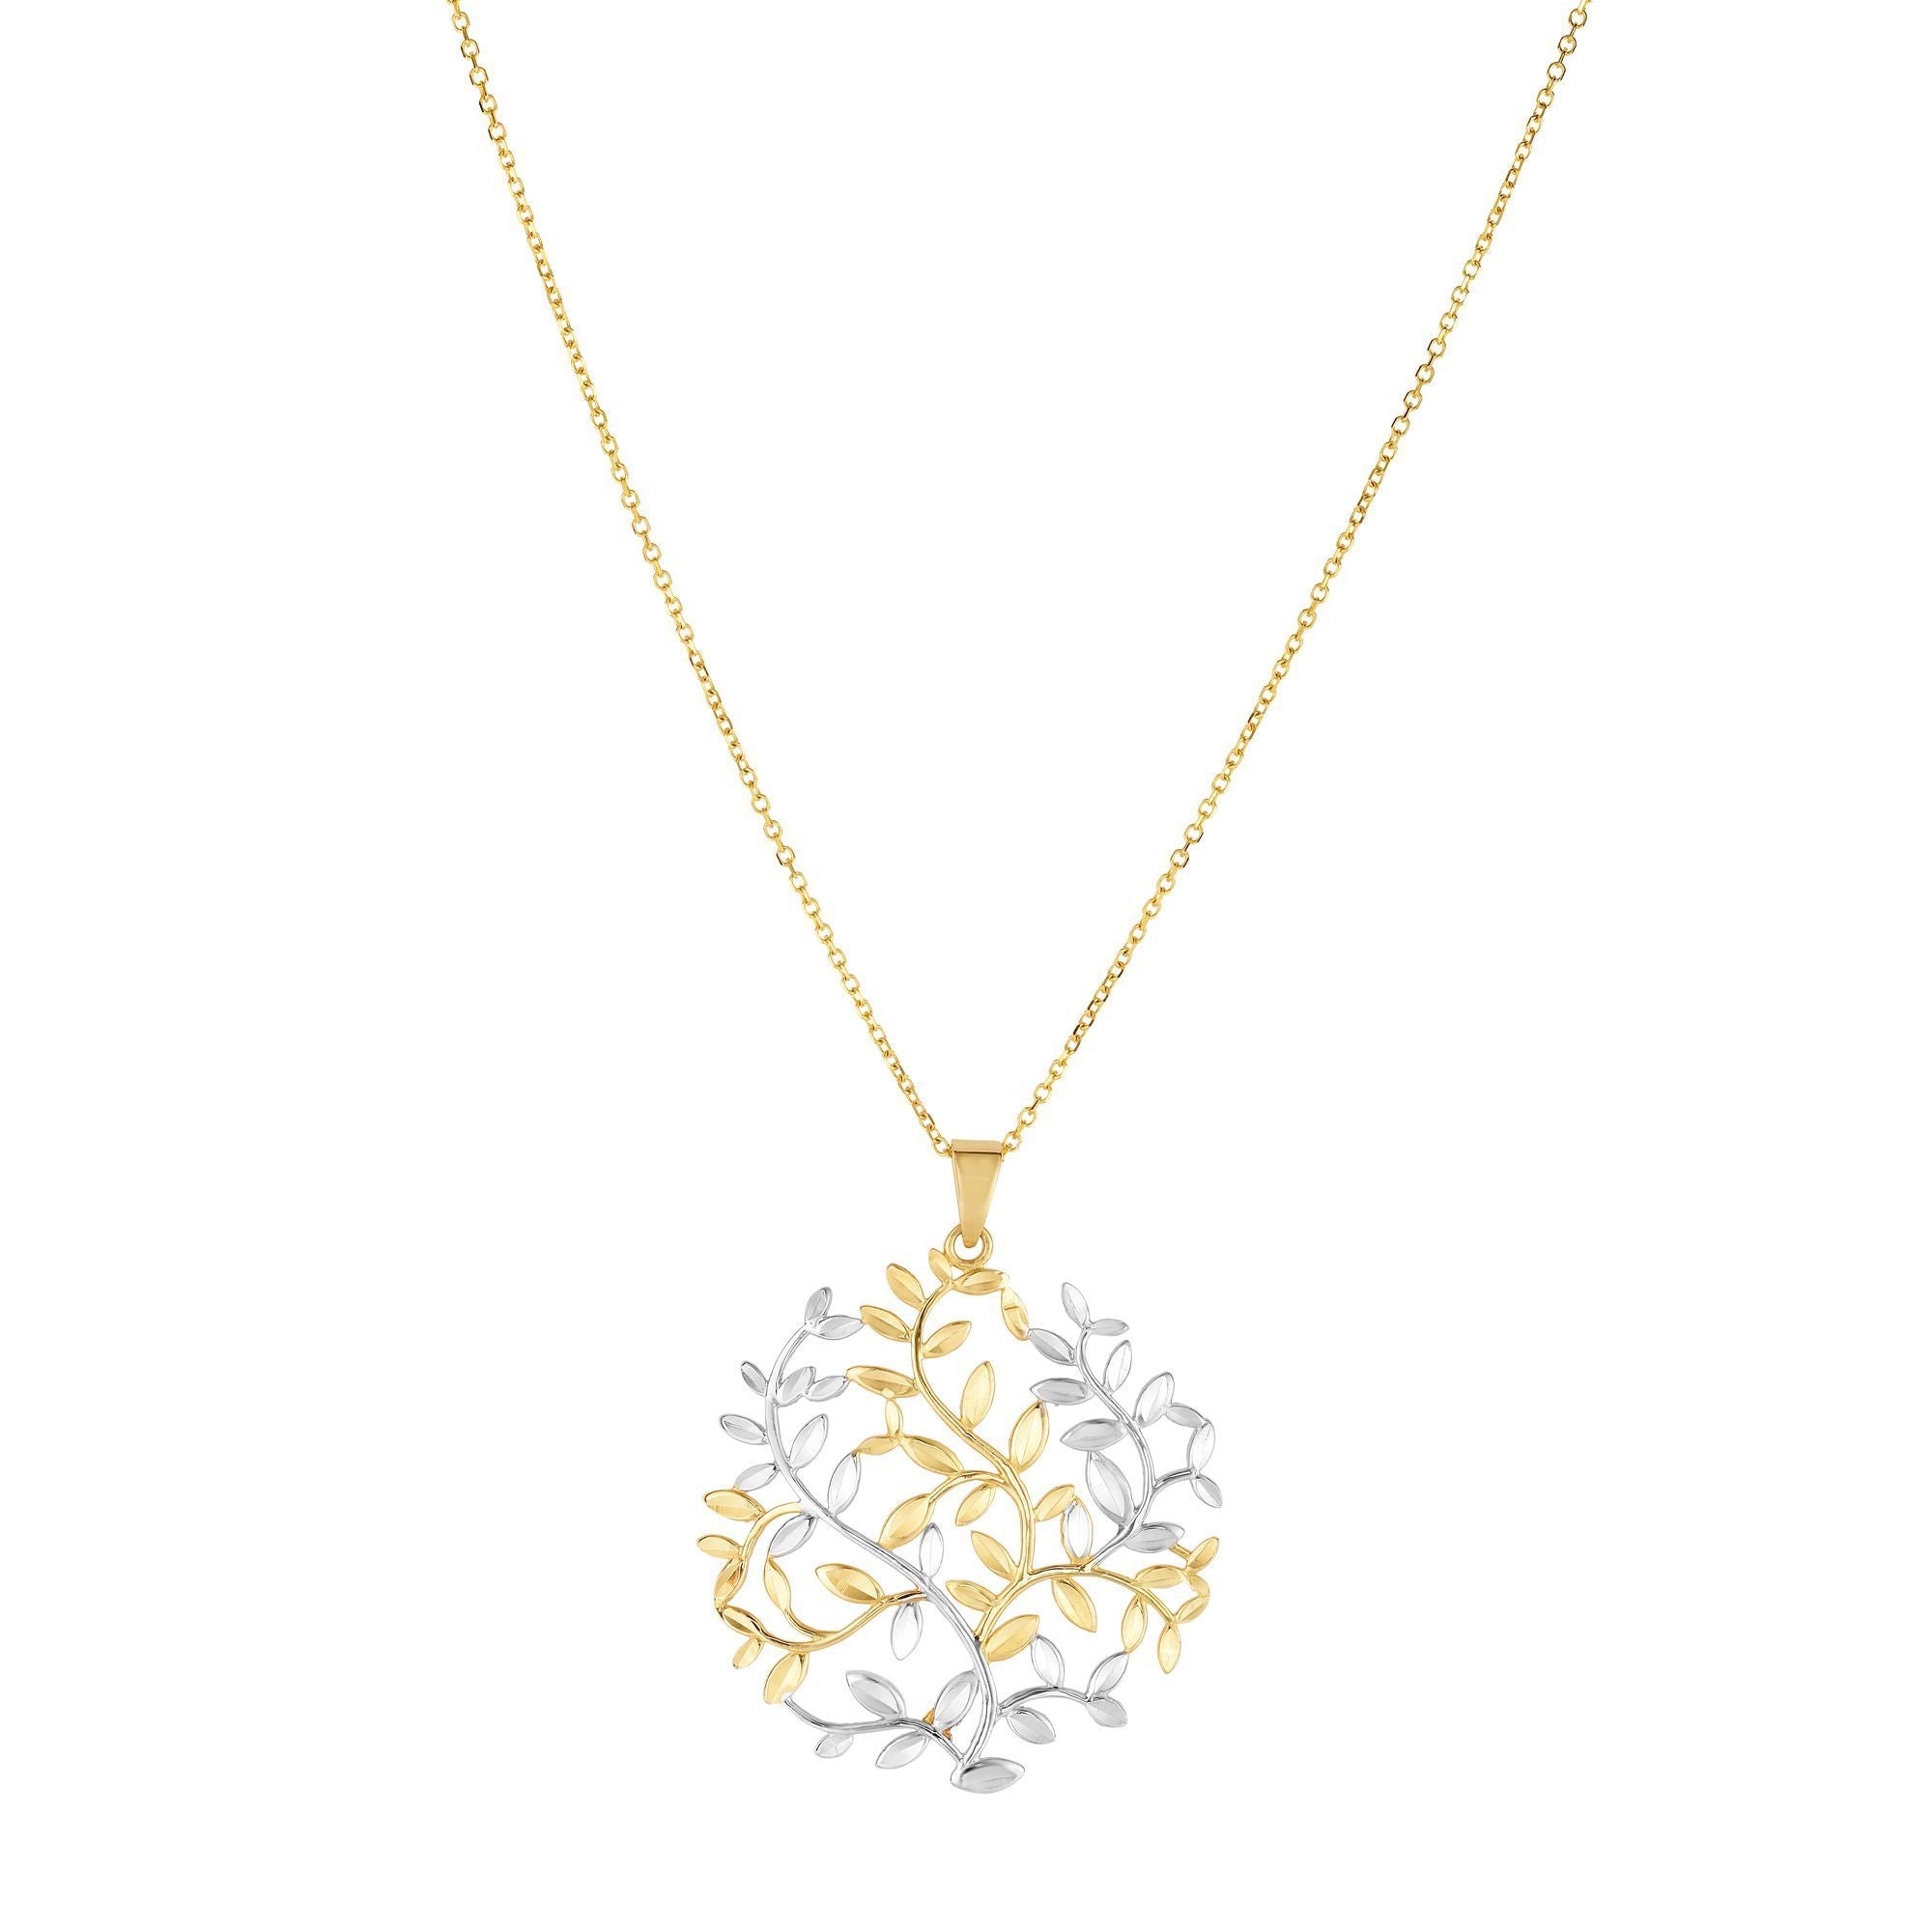 Minimalist Solid Gold Life of Tree Charm Necklace - wingroupjewelry